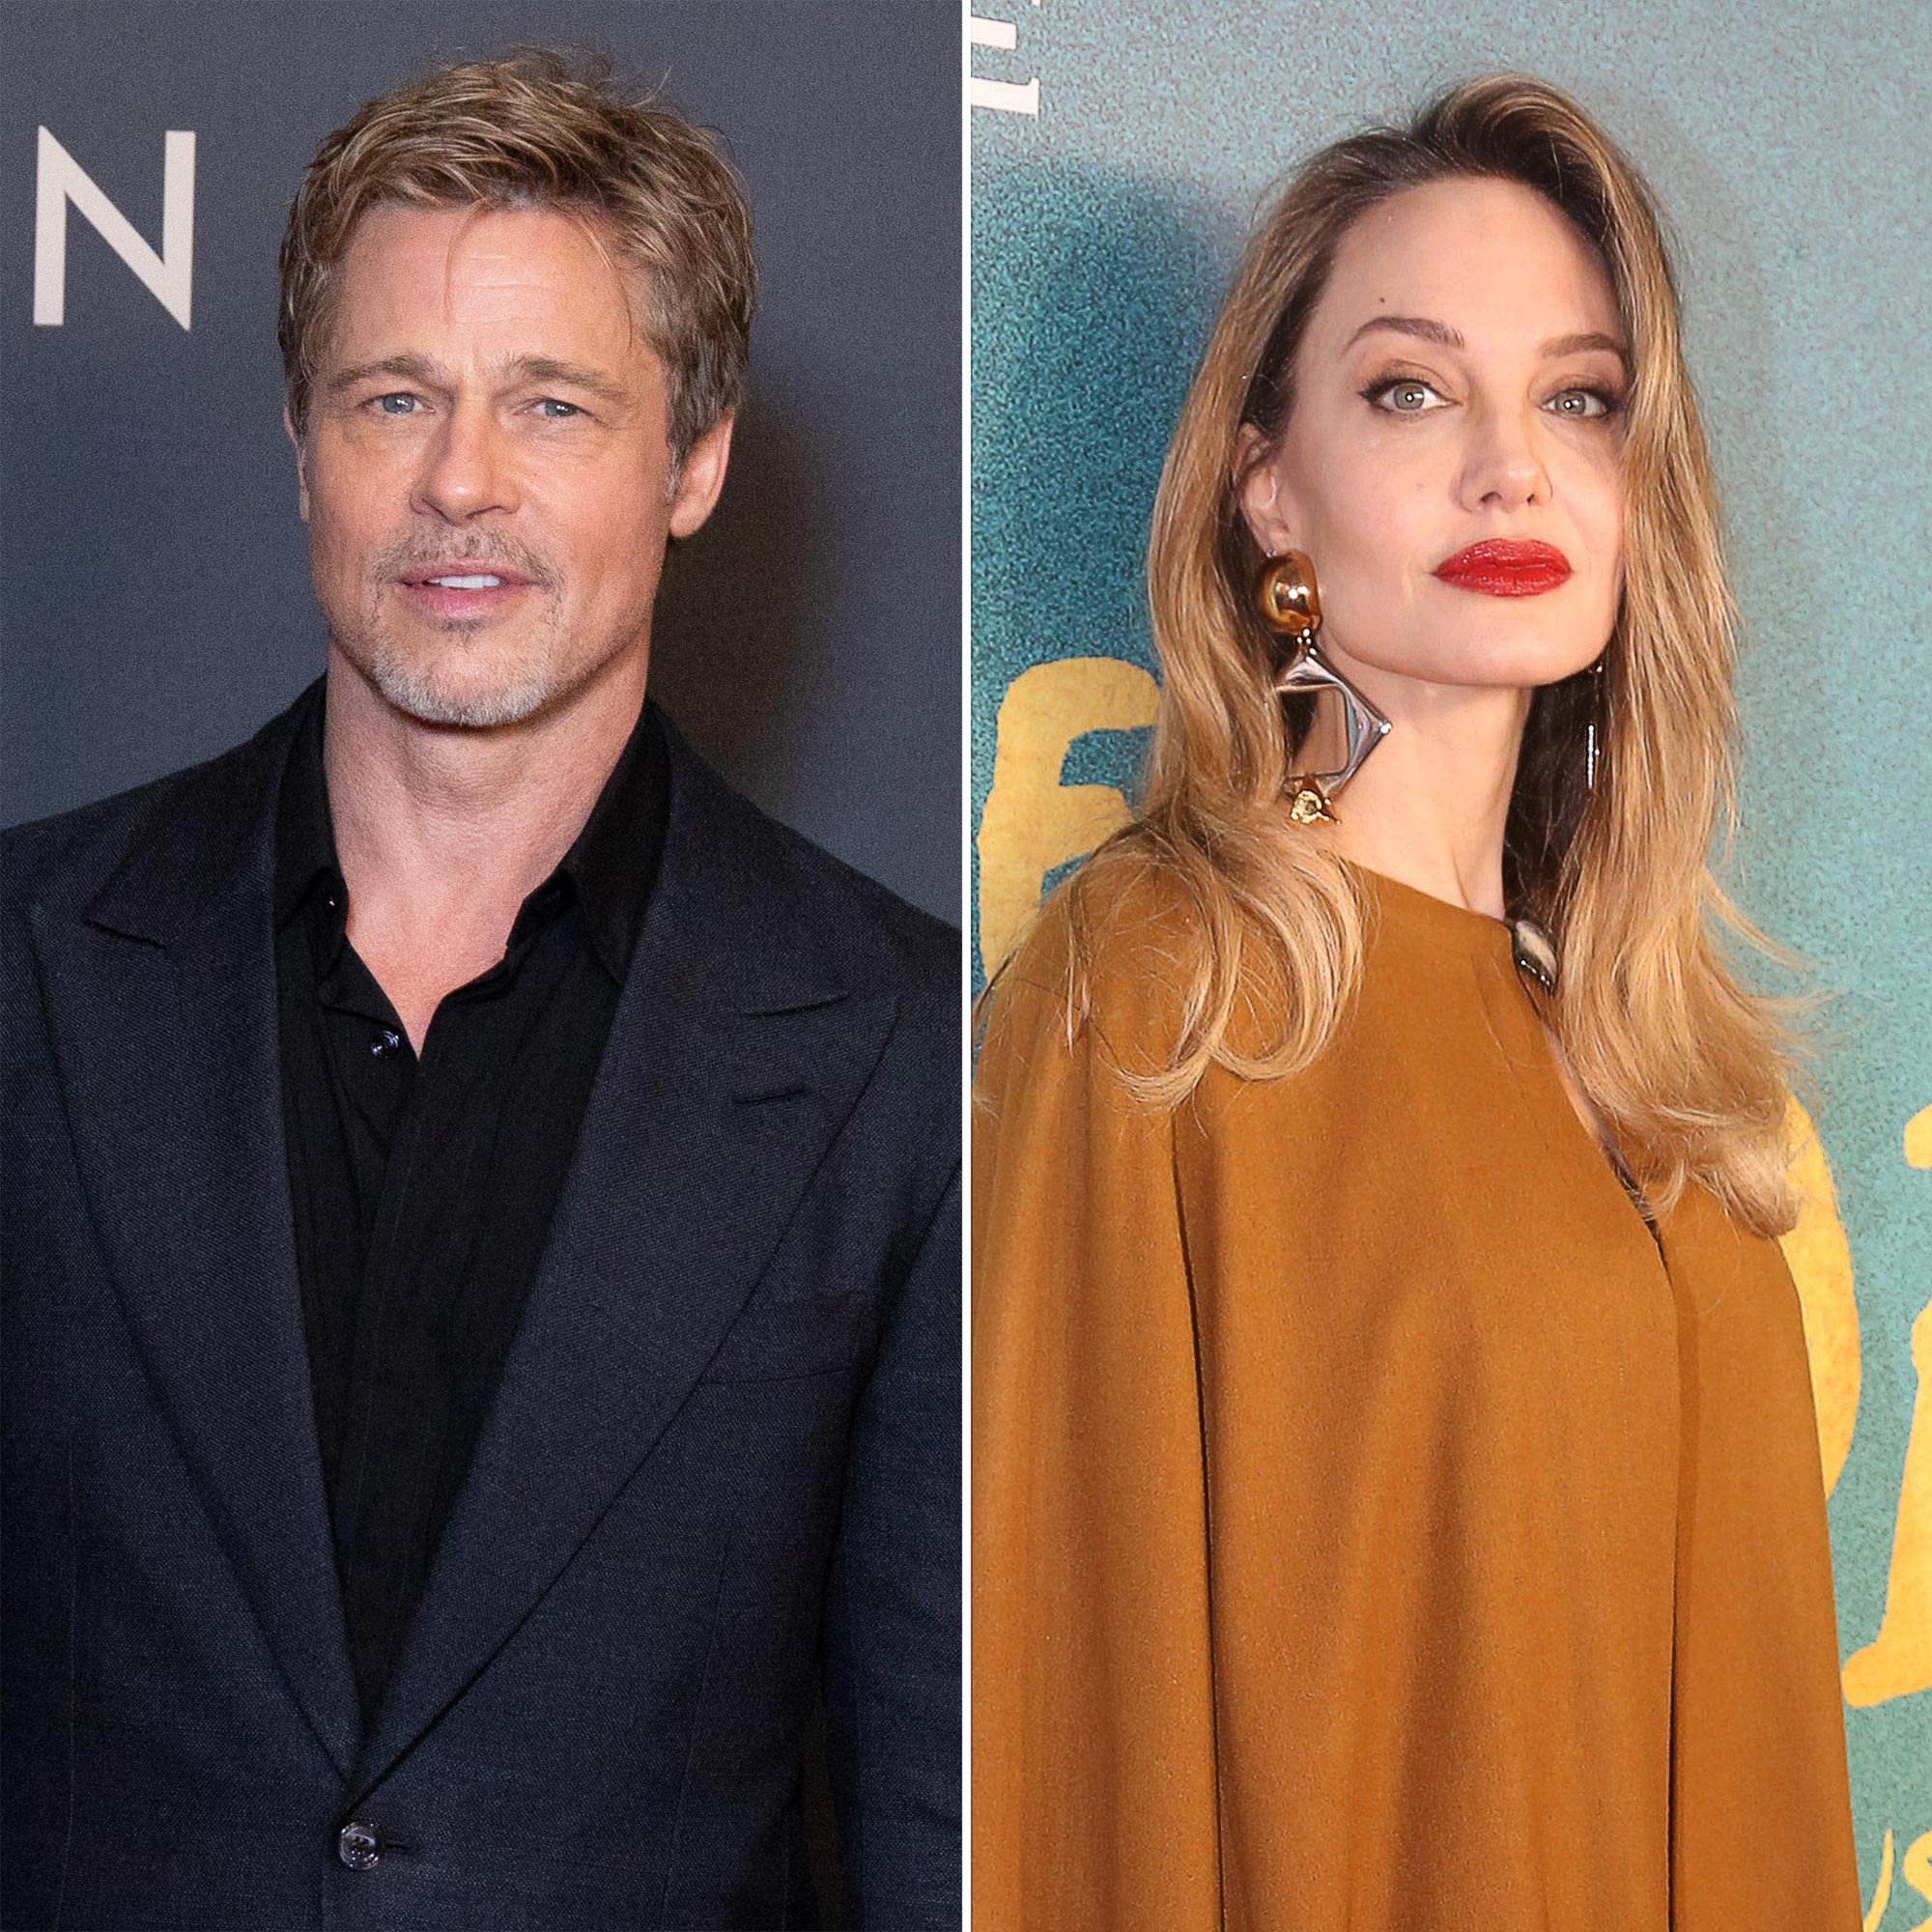 Brad Pitt’s Security Guard Claims Angelina Jolie Wanted Her Kids to Snub Their Father During Visits